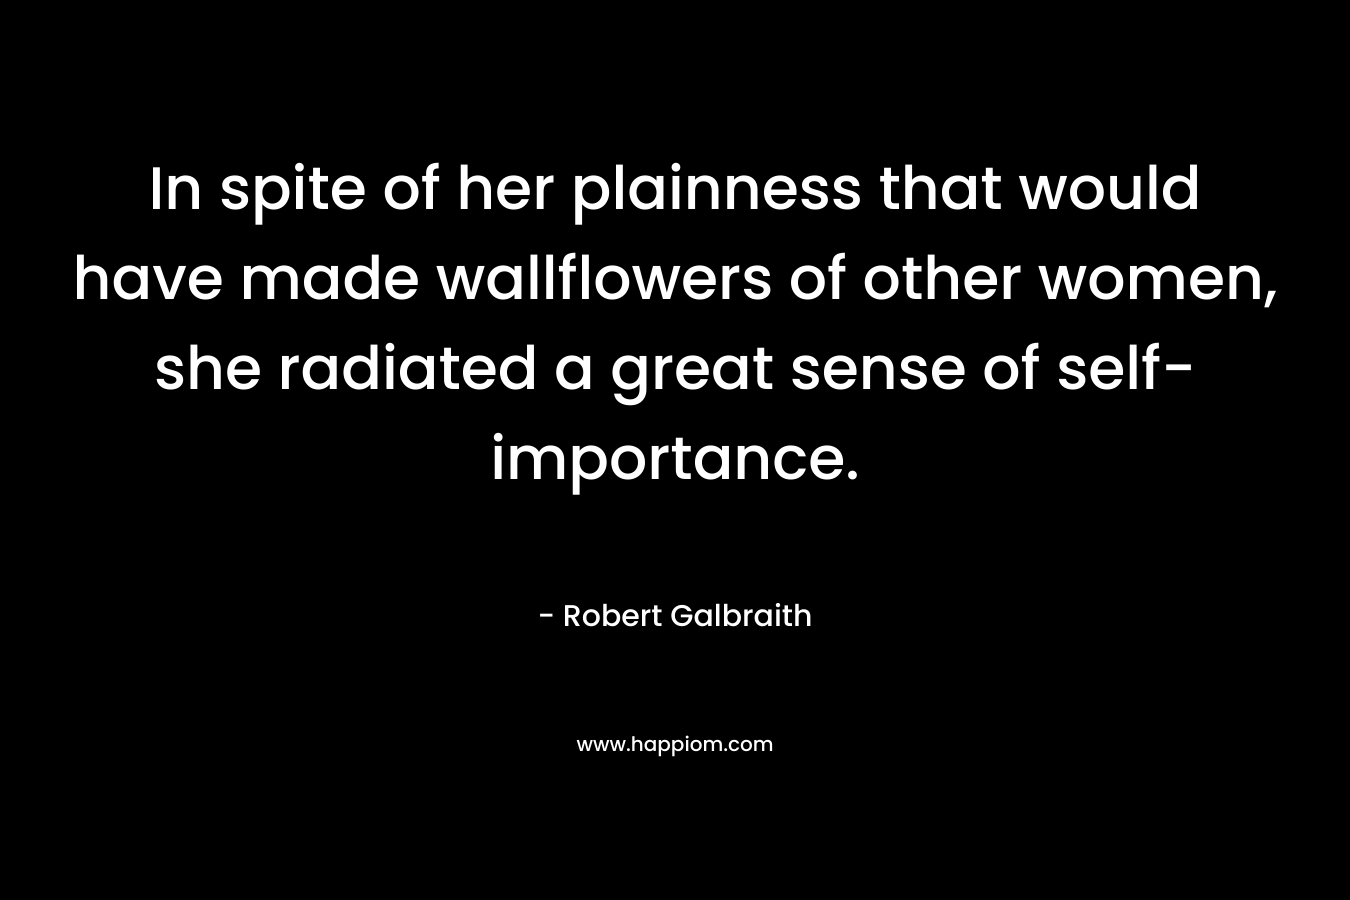 In spite of her plainness that would have made wallflowers of other women, she radiated a great sense of self-importance. – Robert Galbraith